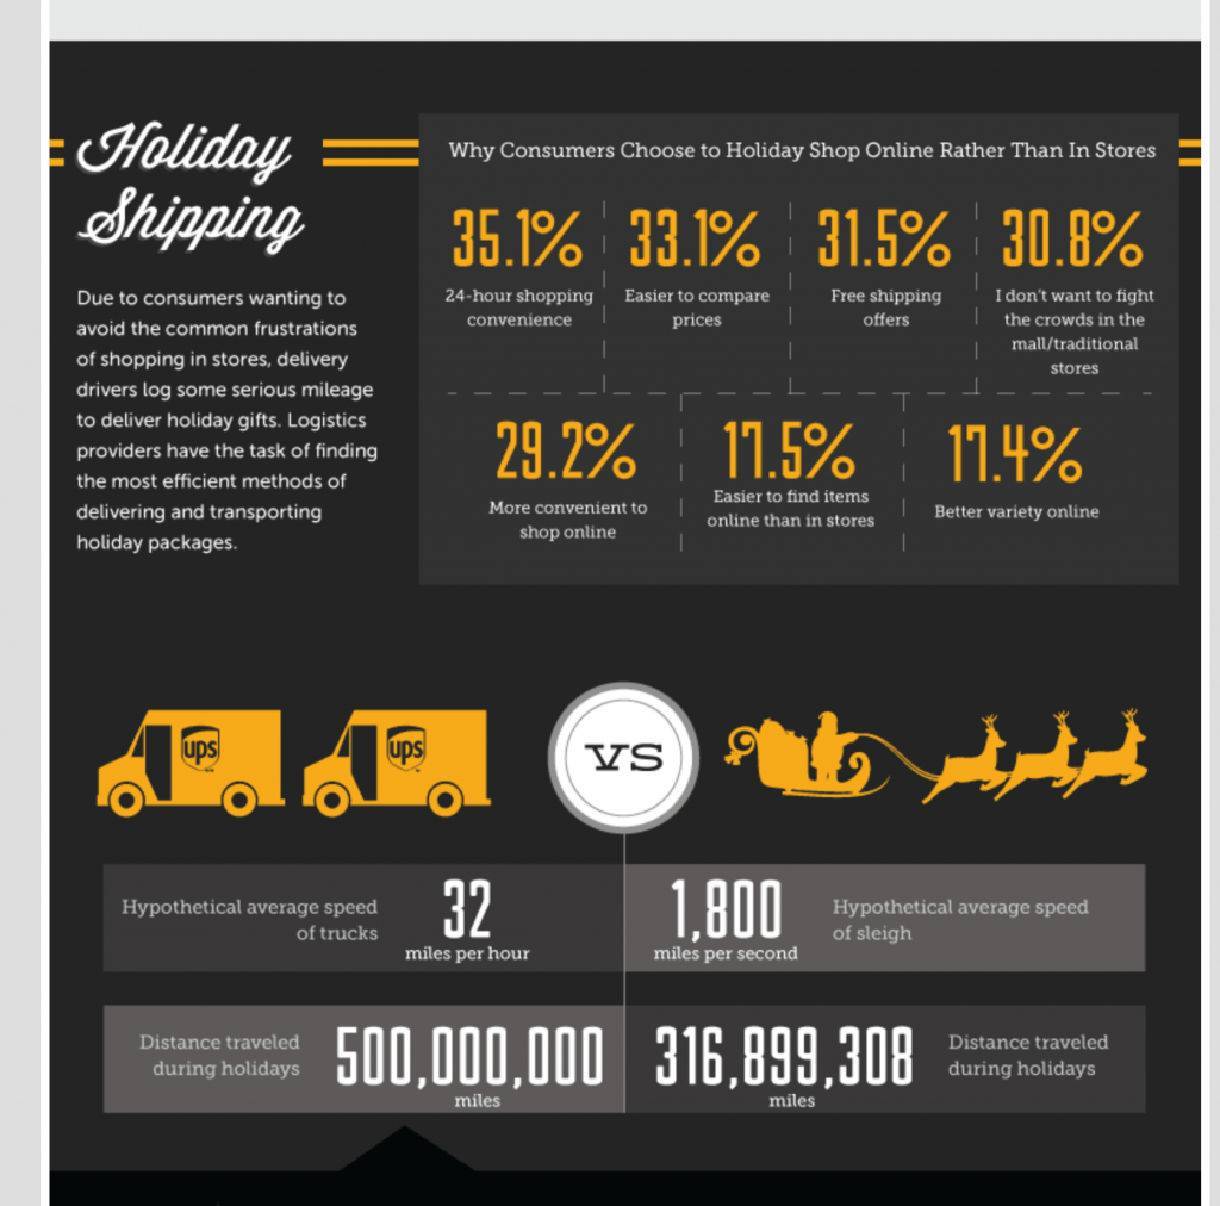 infographic showing statistics related to shipping during the holidays